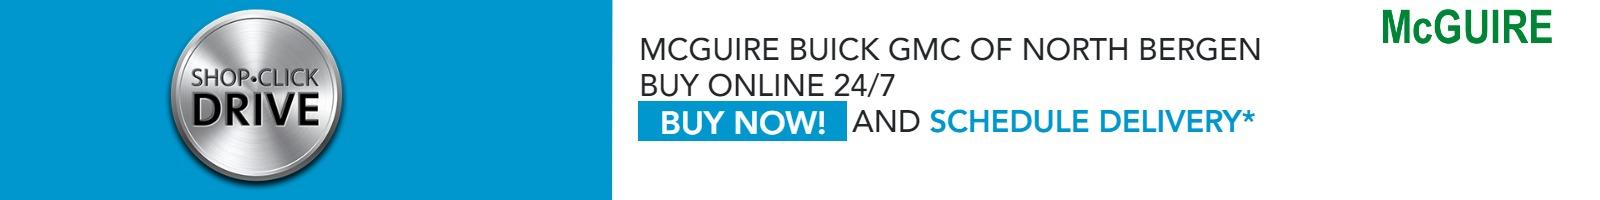 McGuire Buick GMC Of North Bergen
Buy Online 24/7
Now offering free home delivery